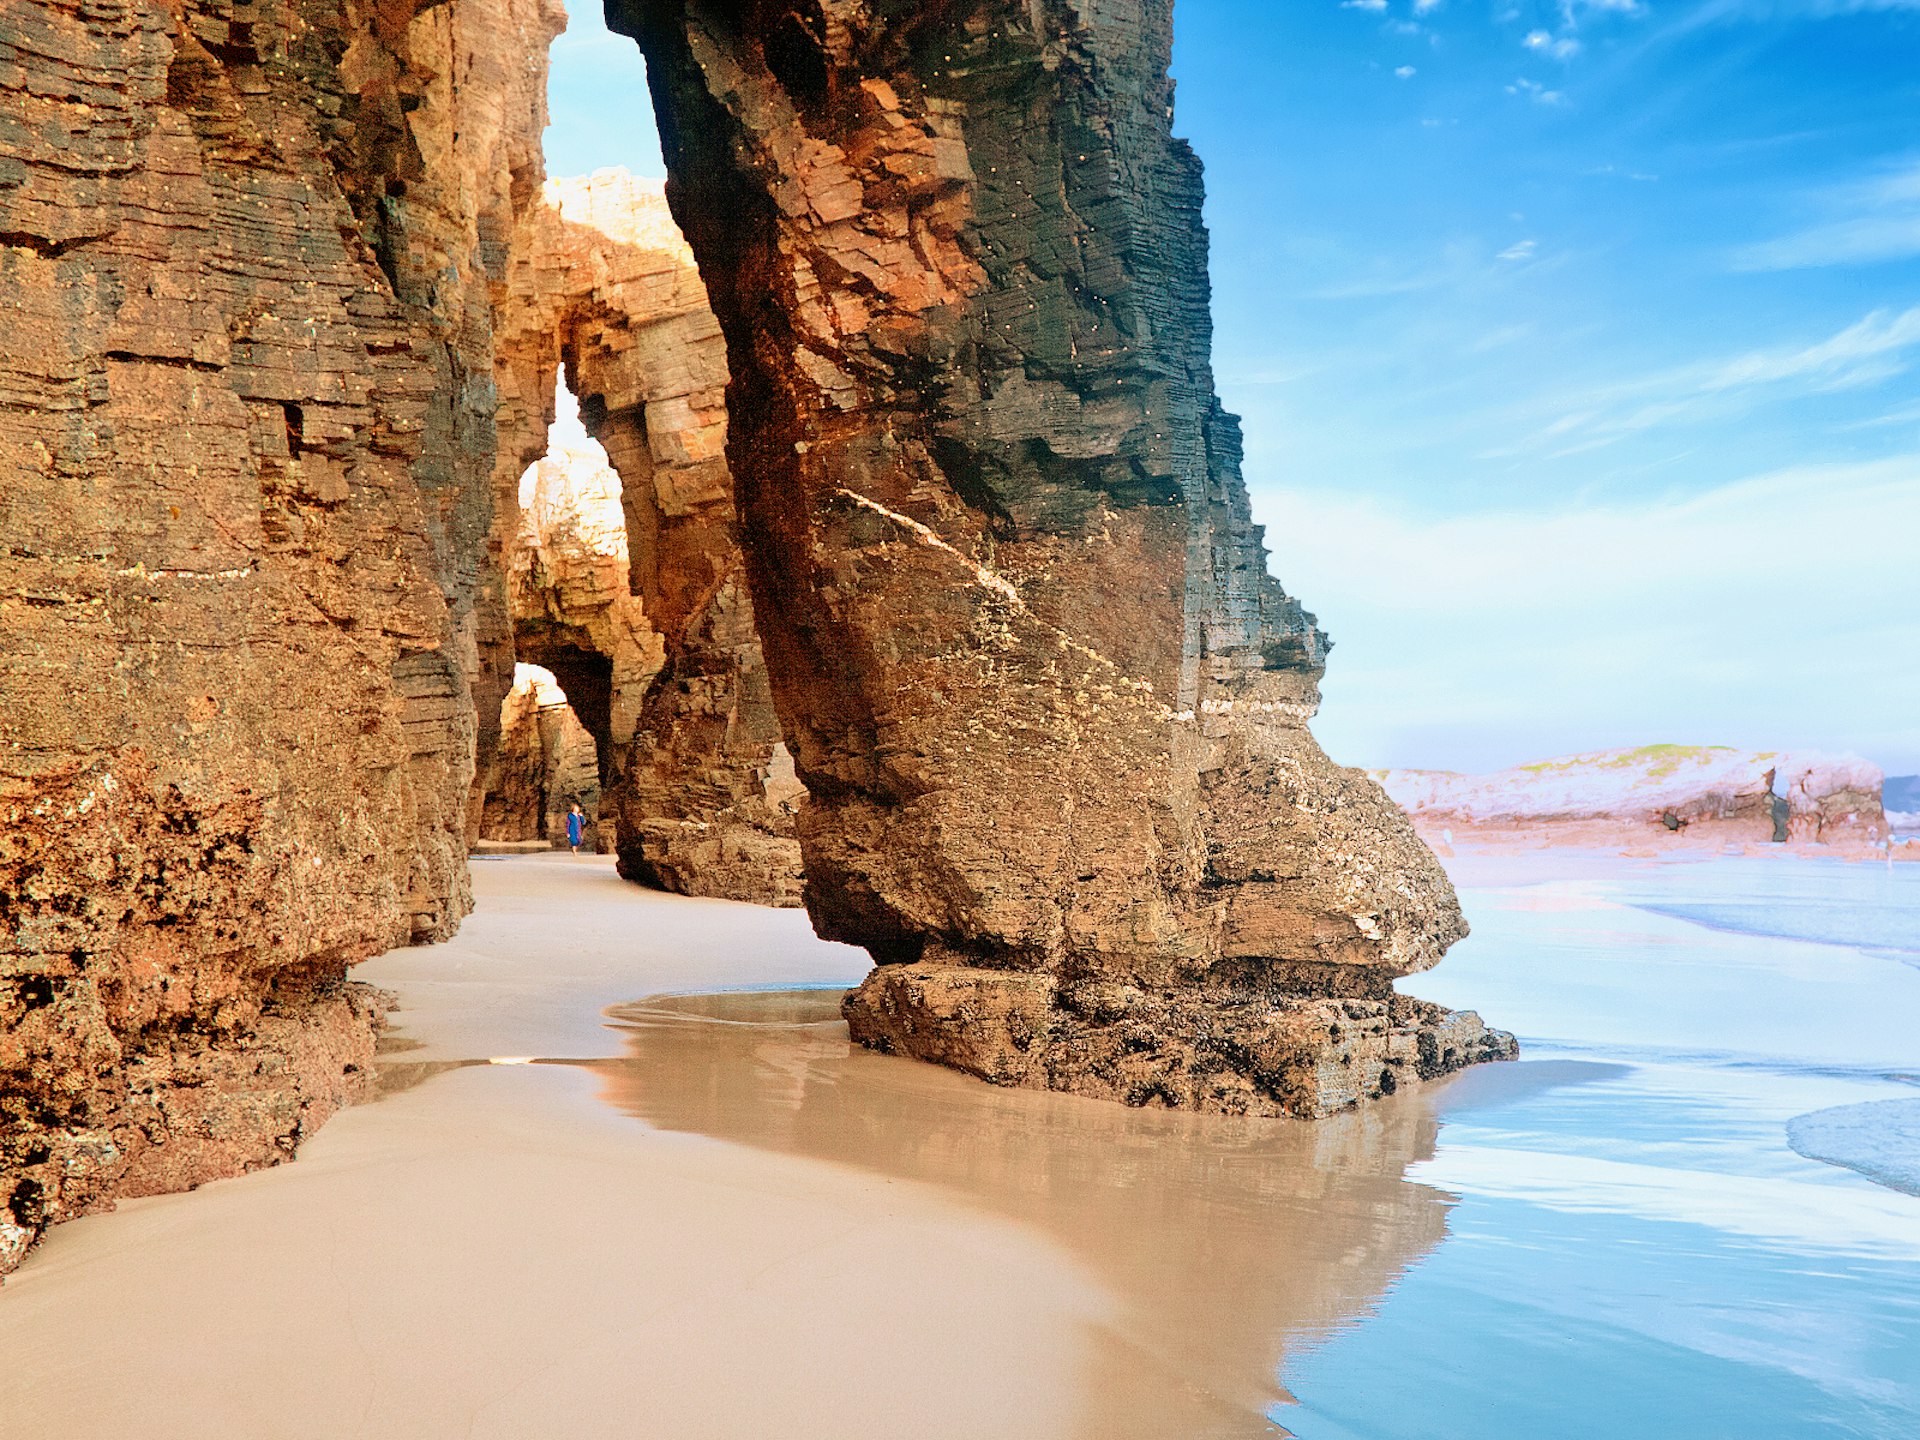 The rock arches of Cathedral beach